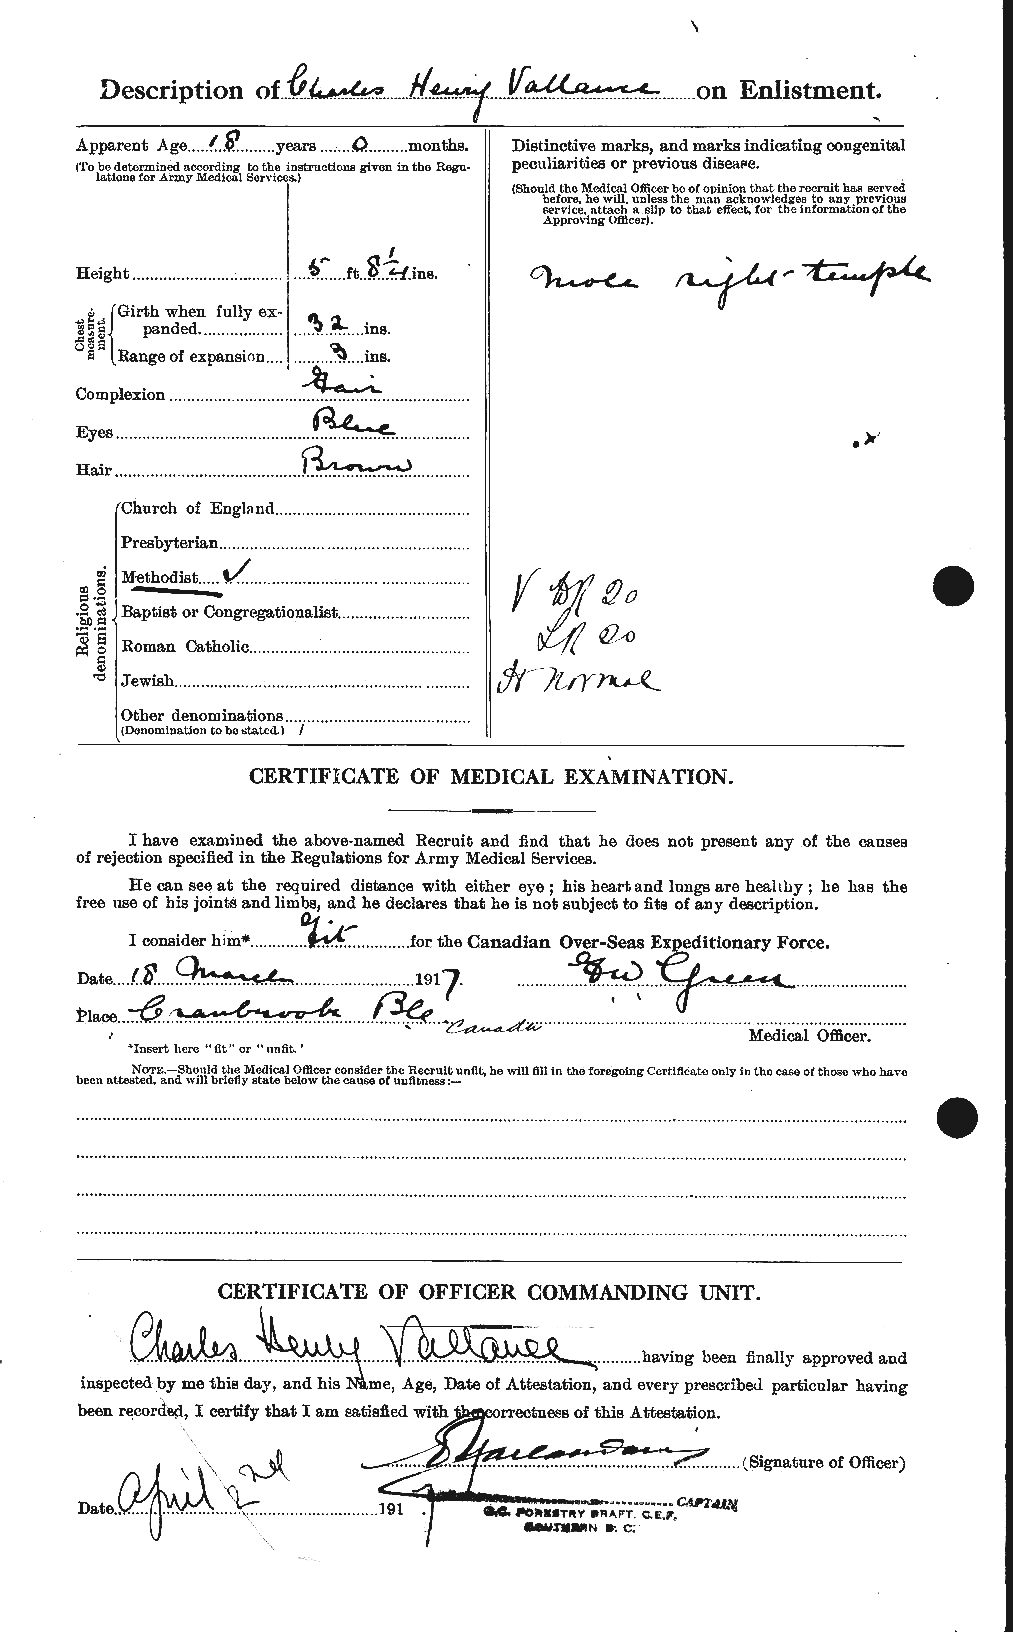 Personnel Records of the First World War - CEF 645112b